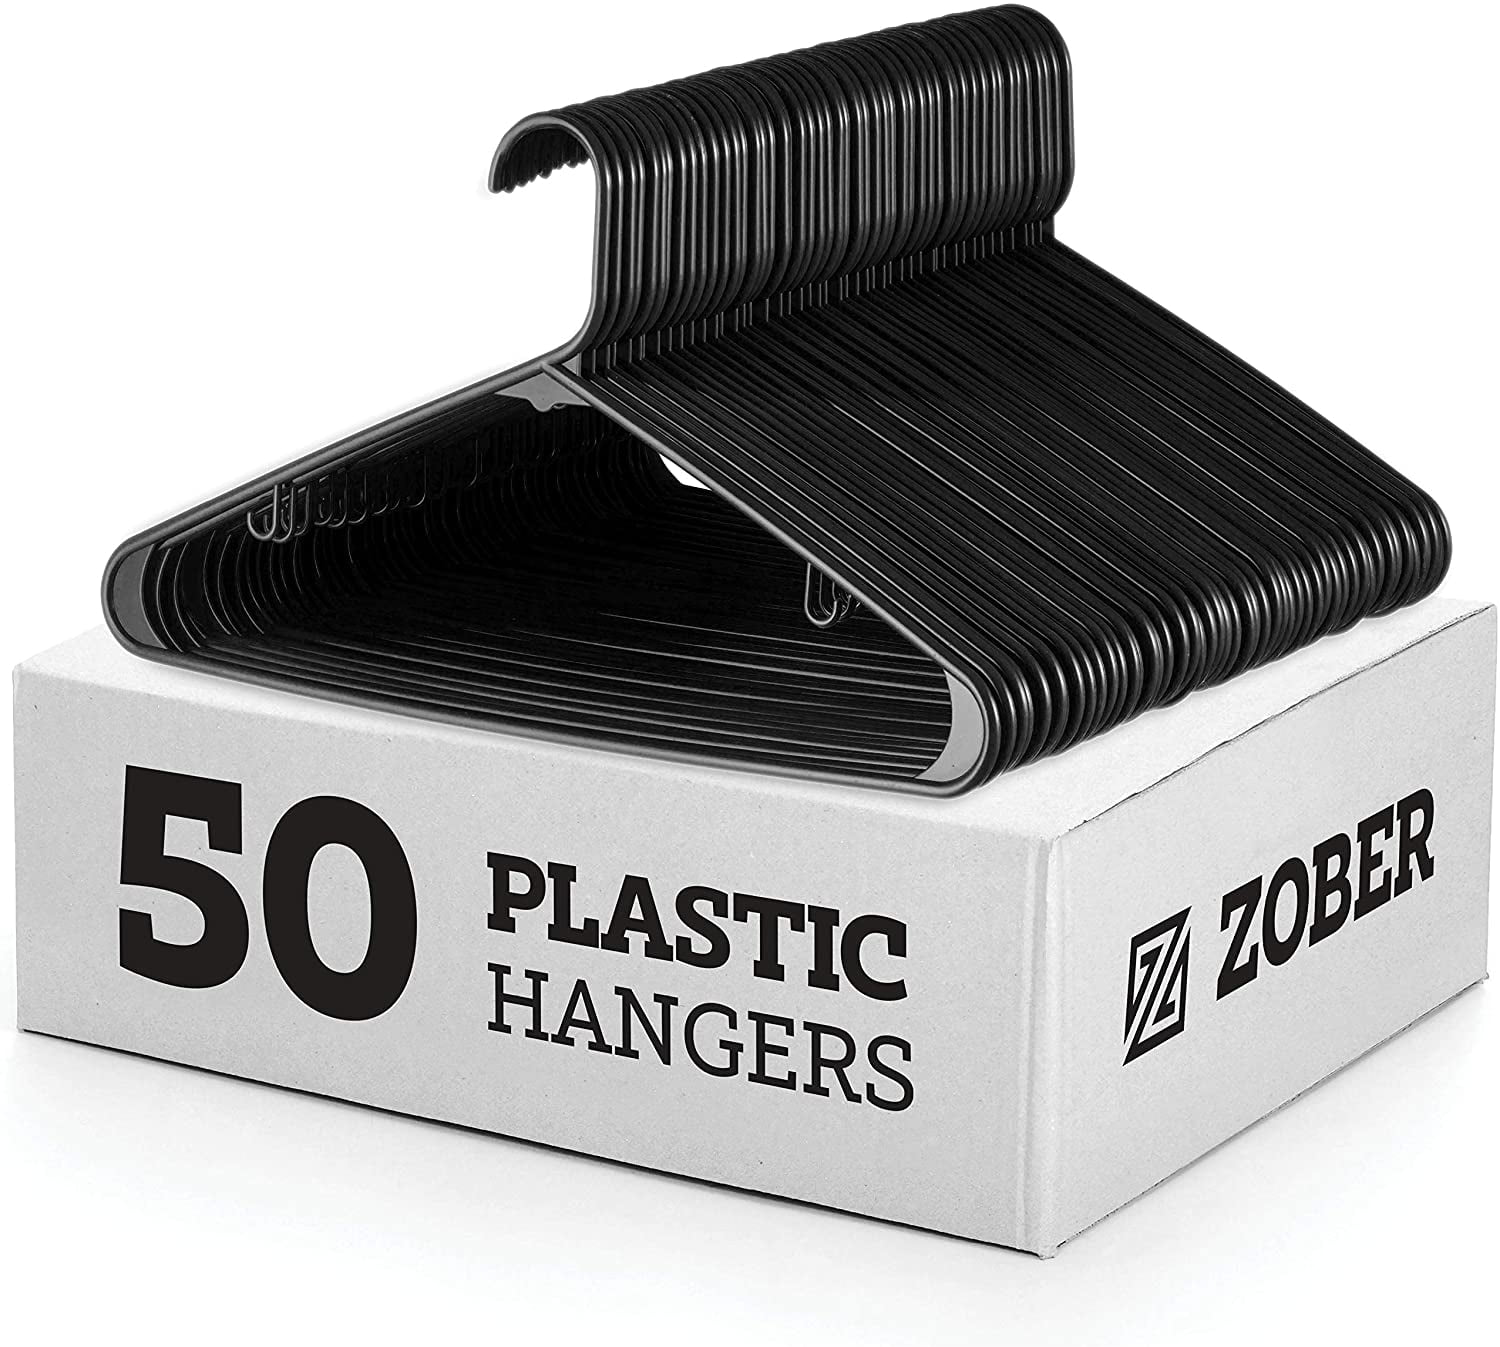 Zober Plastic Hangers 50 Pack - Standard Set of Slim Heavy Duty Clothes  Hangers w/Hooks for Coats, Jackets & Pants for Everyday Use, White